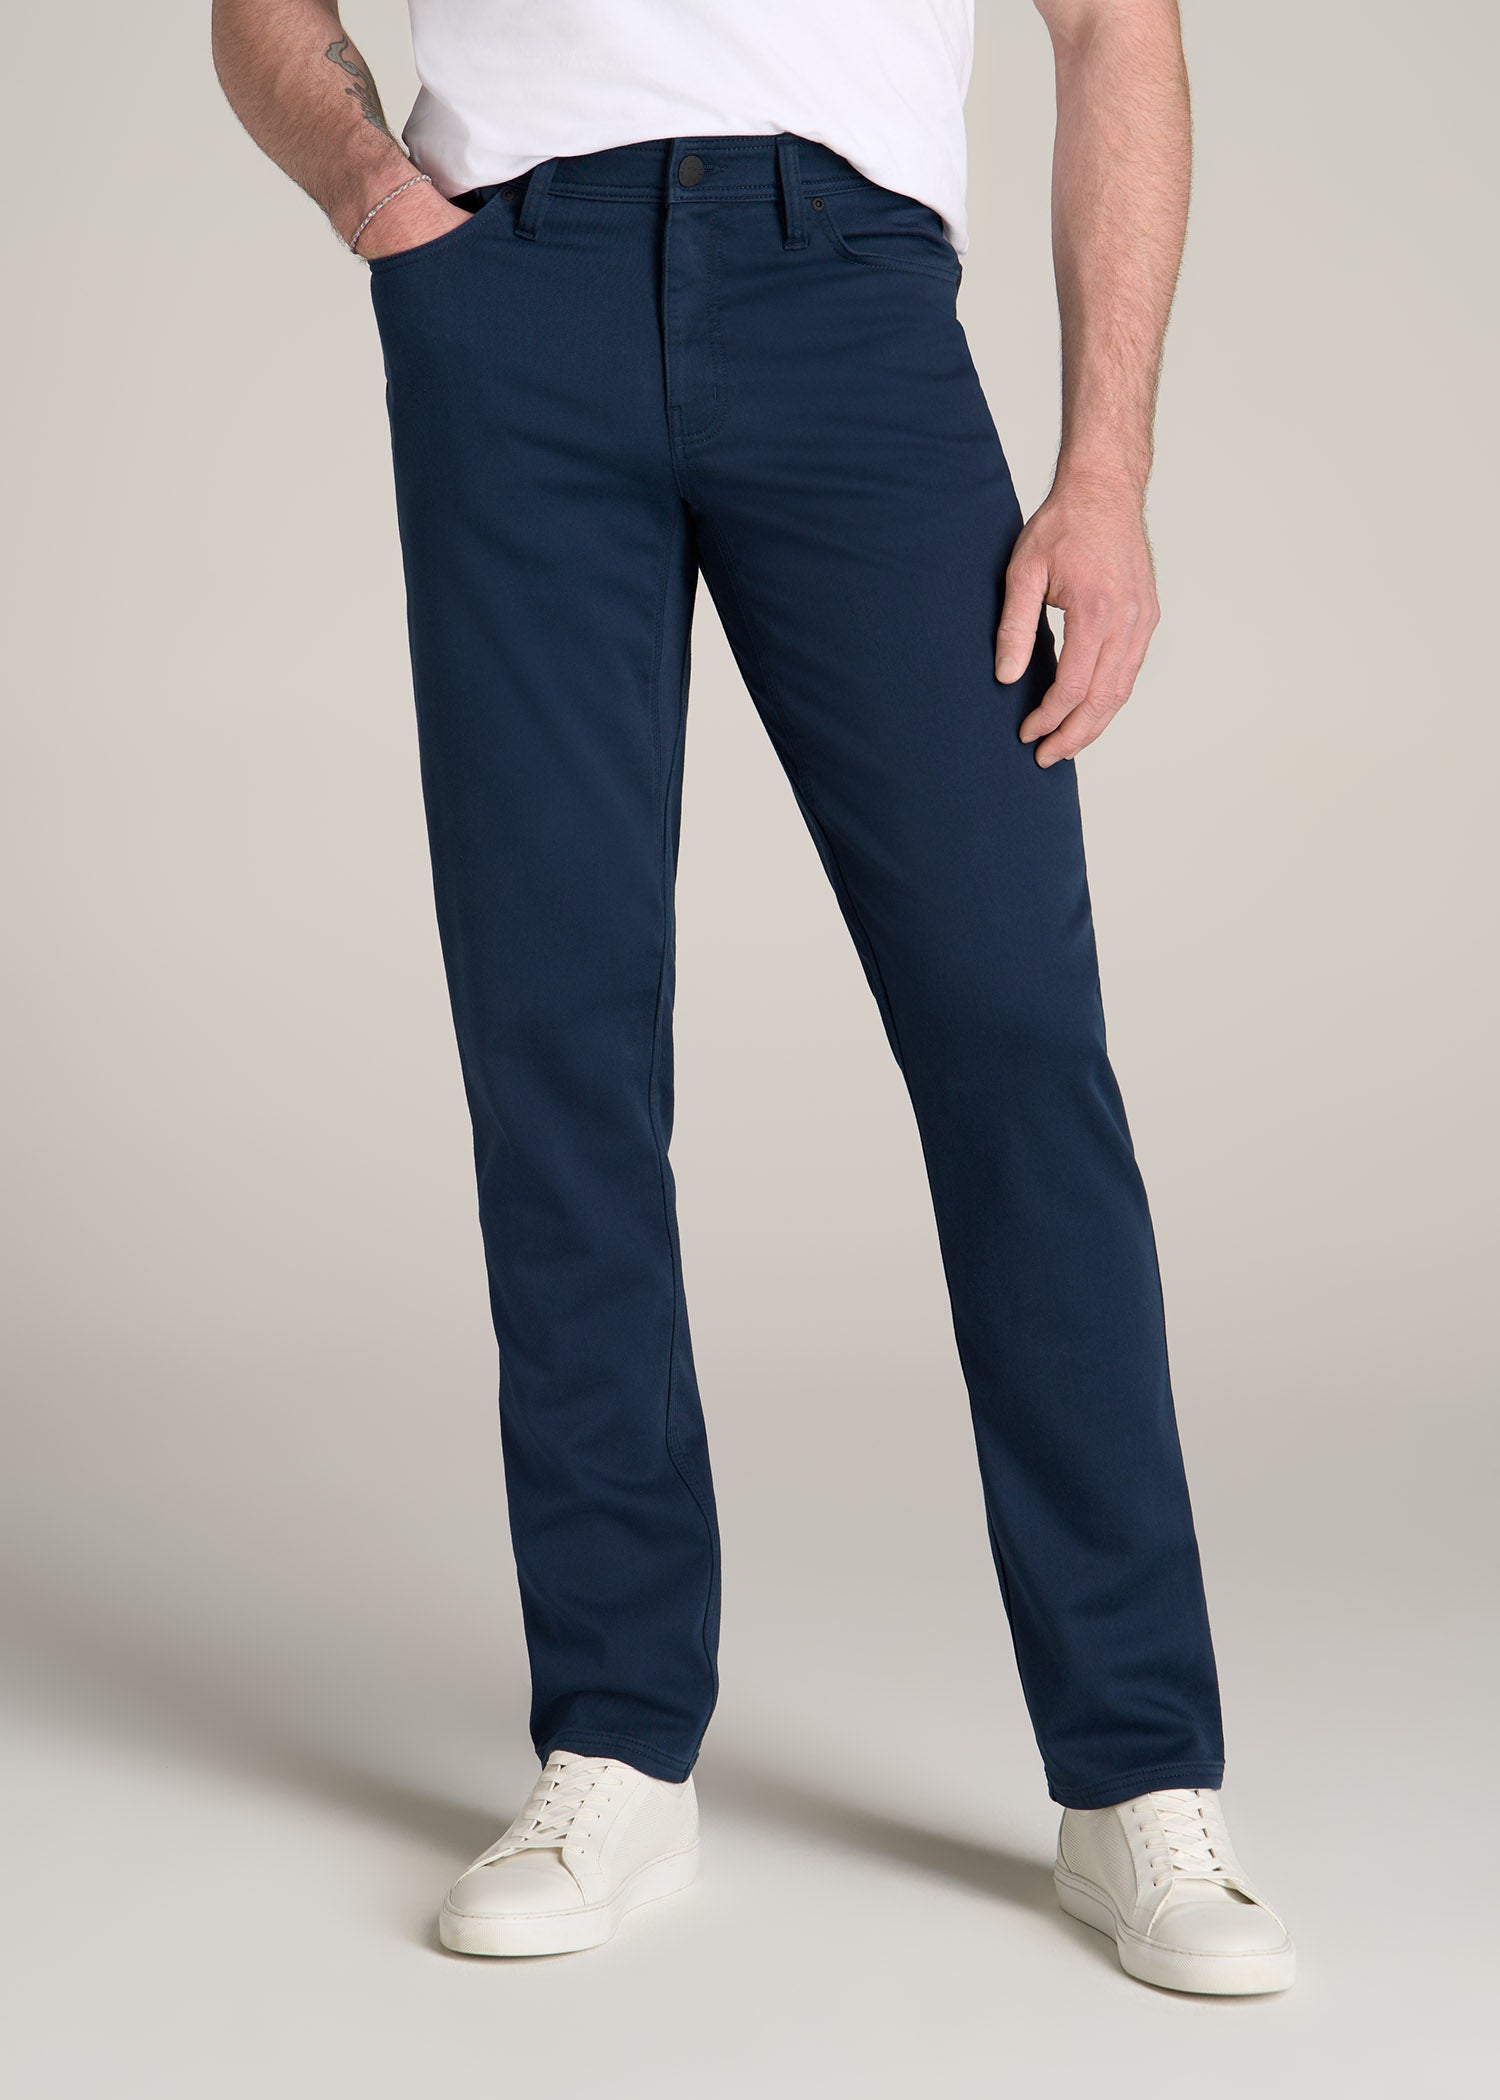 Everyday Comfort 5-Pocket Pant for Tall Men | American Tall